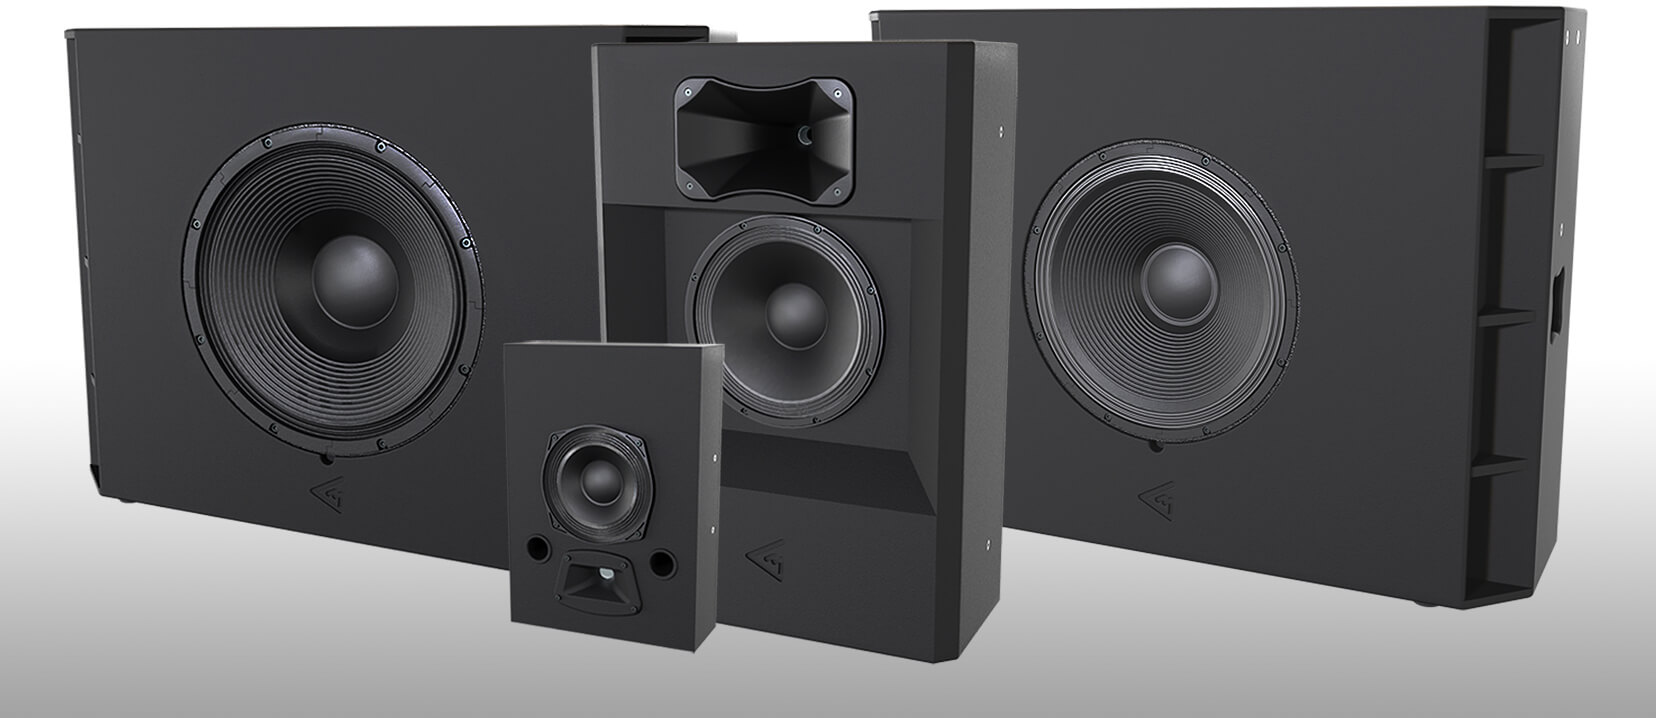 Group picture of the MAG Audio Theatron Performance Series loudspeakers